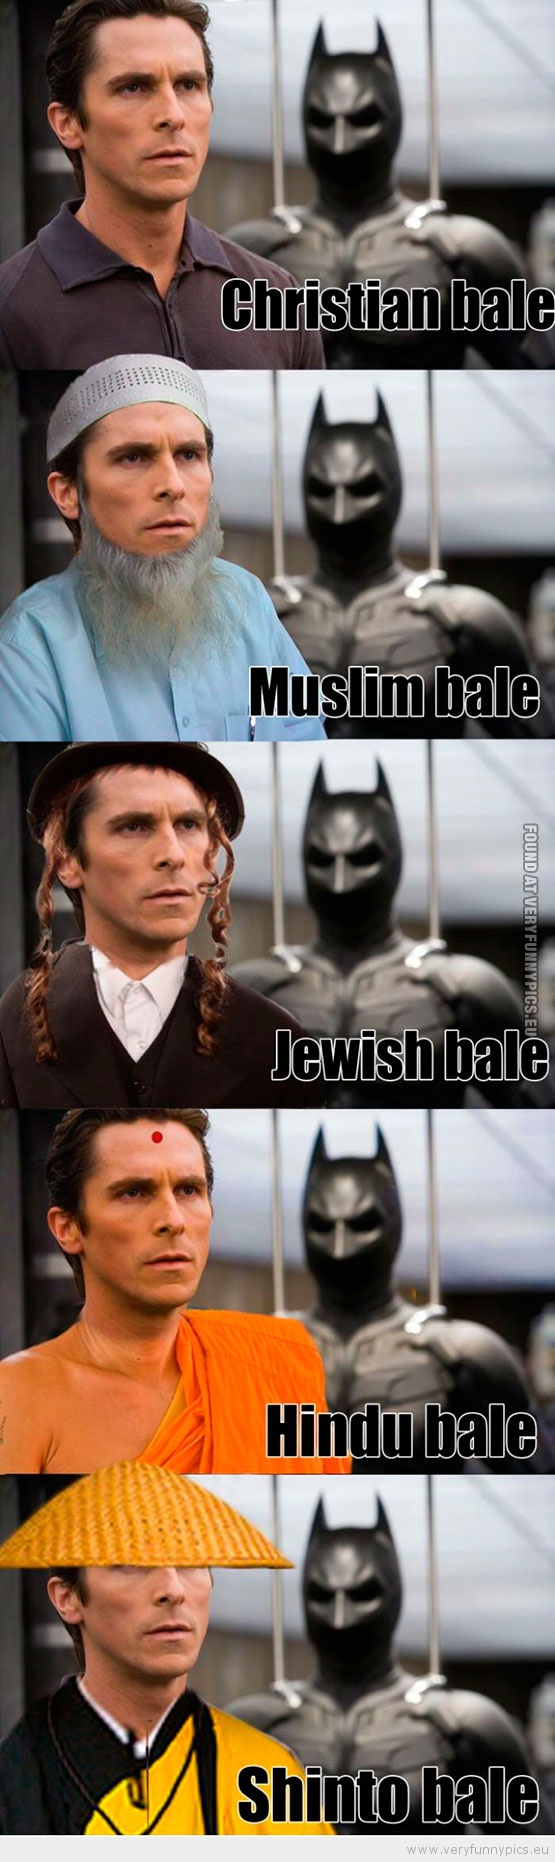 Funny Picture - Christian bale muslim bale